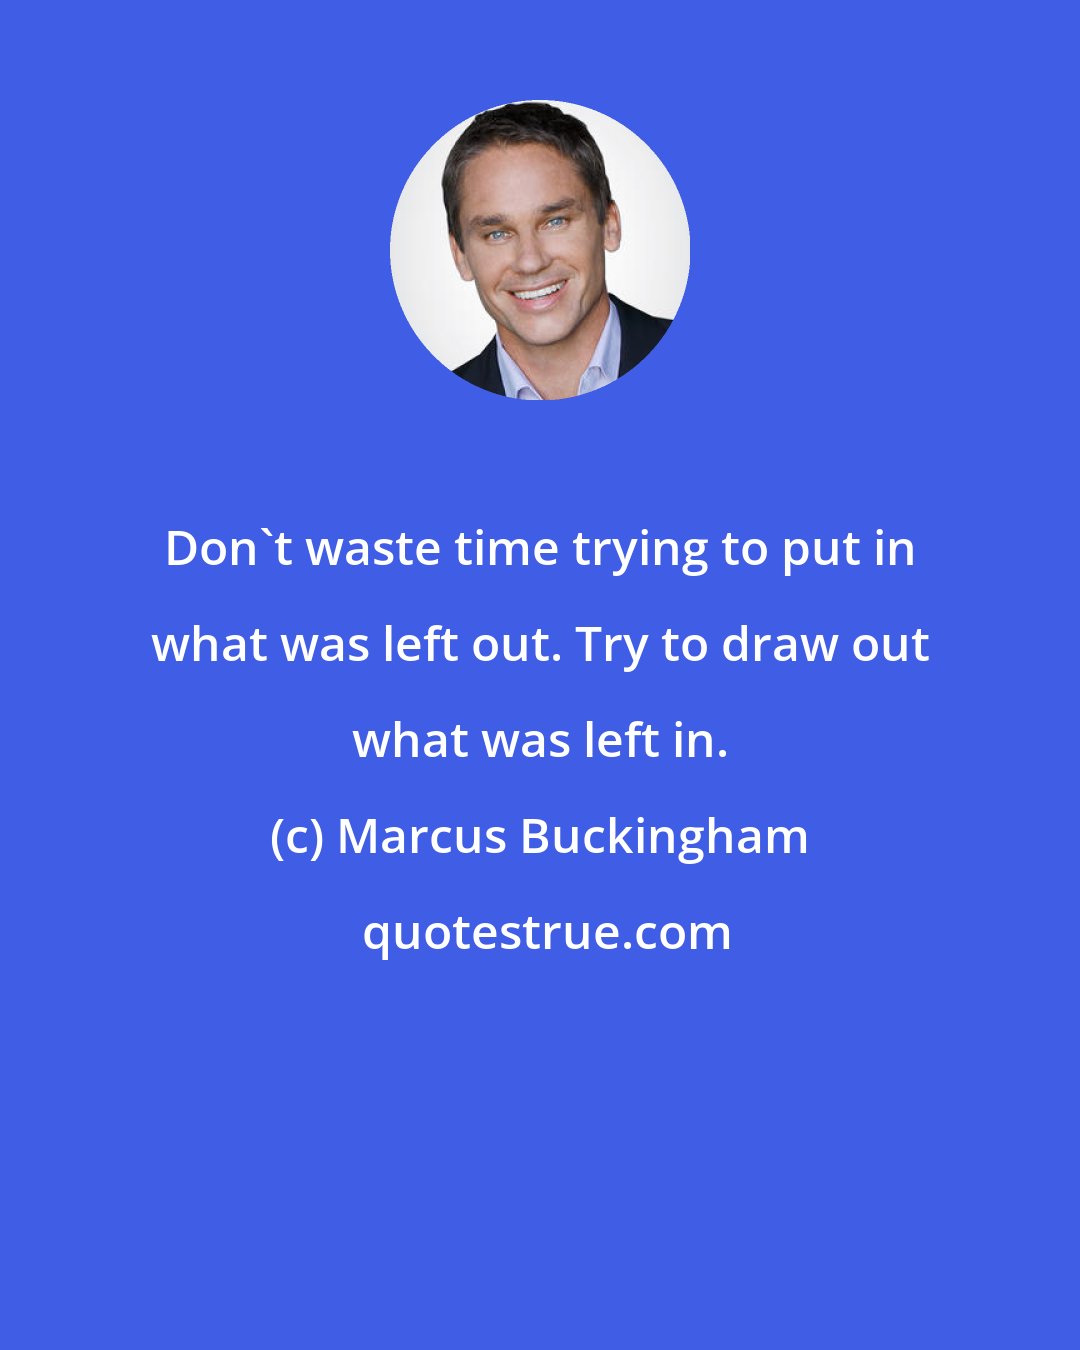 Marcus Buckingham: Don't waste time trying to put in what was left out. Try to draw out what was left in.